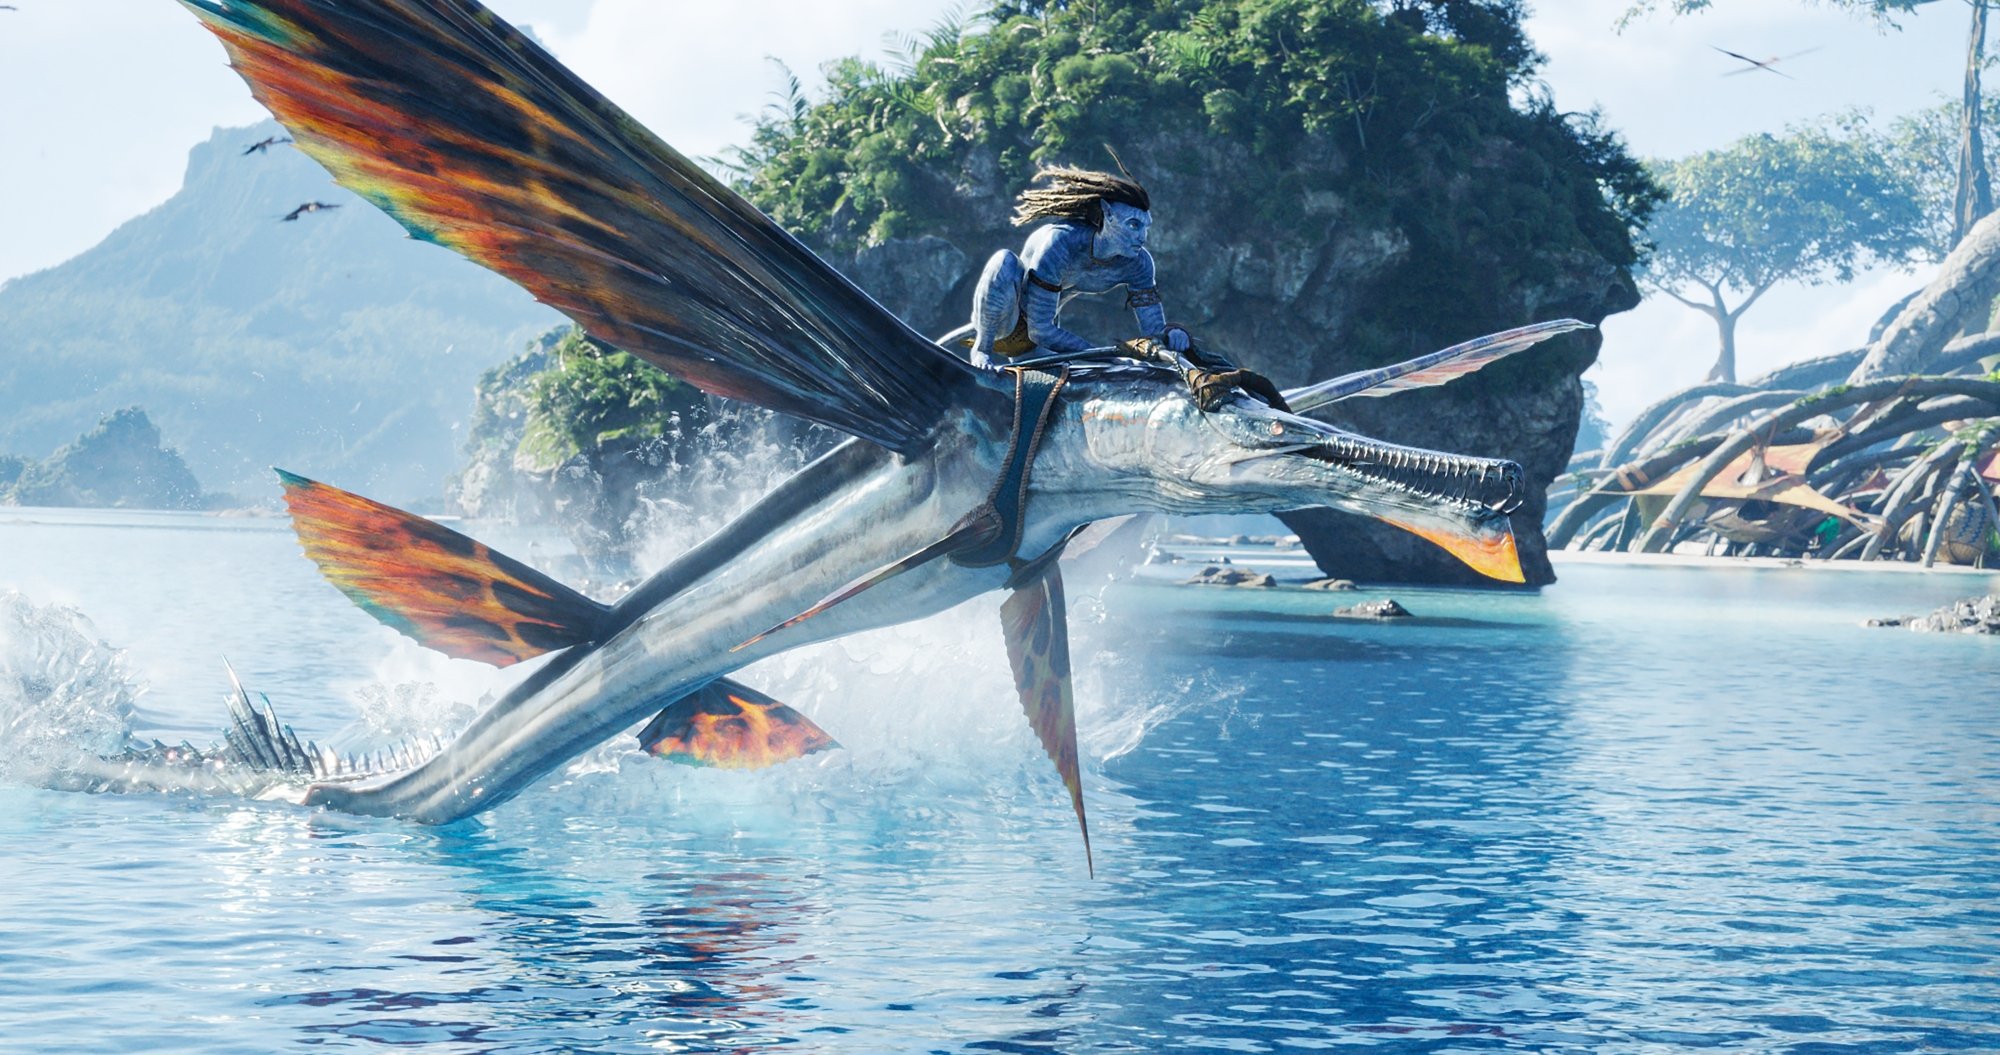 James Cameron's 'Avatar_ The Way of Water' Sam Worthington as Jake Sully riding a skimwing over the ocean water